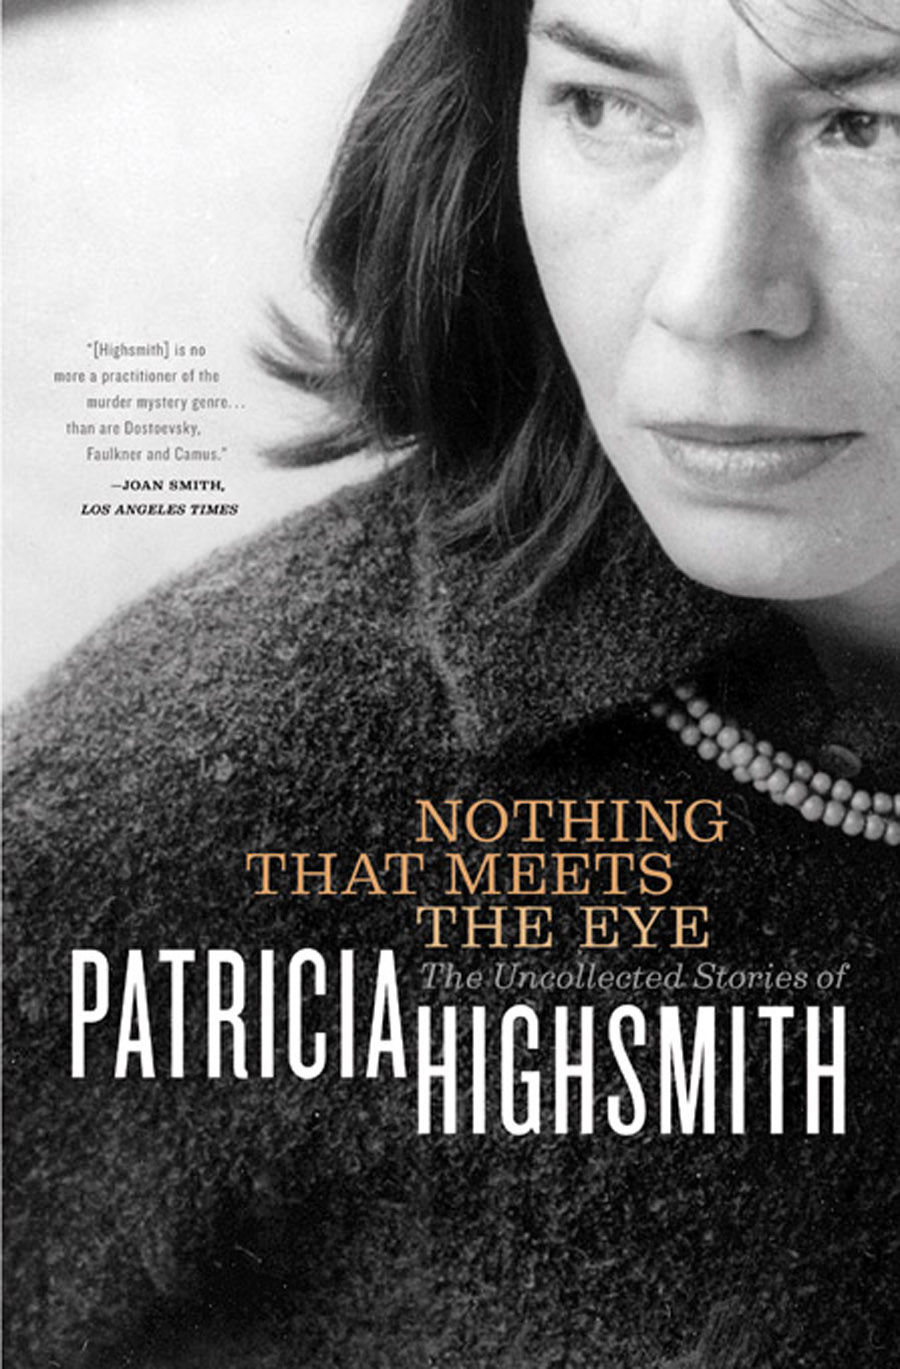 Nothing That Meets the Eye (2012) by Patricia Highsmith